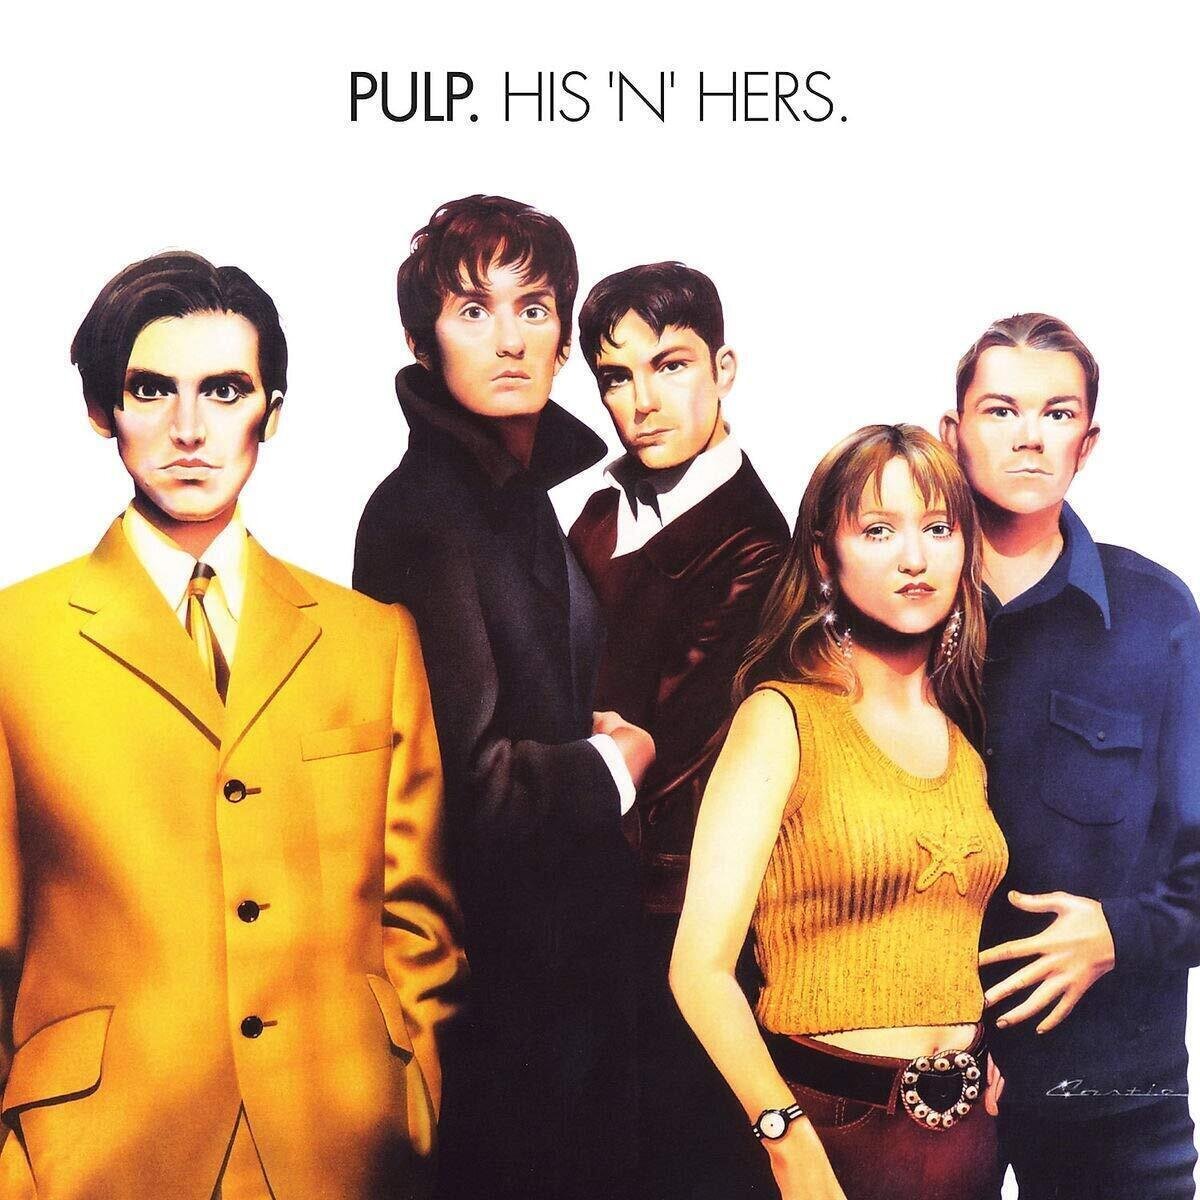 Vinyl Record Pulp - His 'N' Hers (Deluxe Edition) (Remastered) (2 LP)